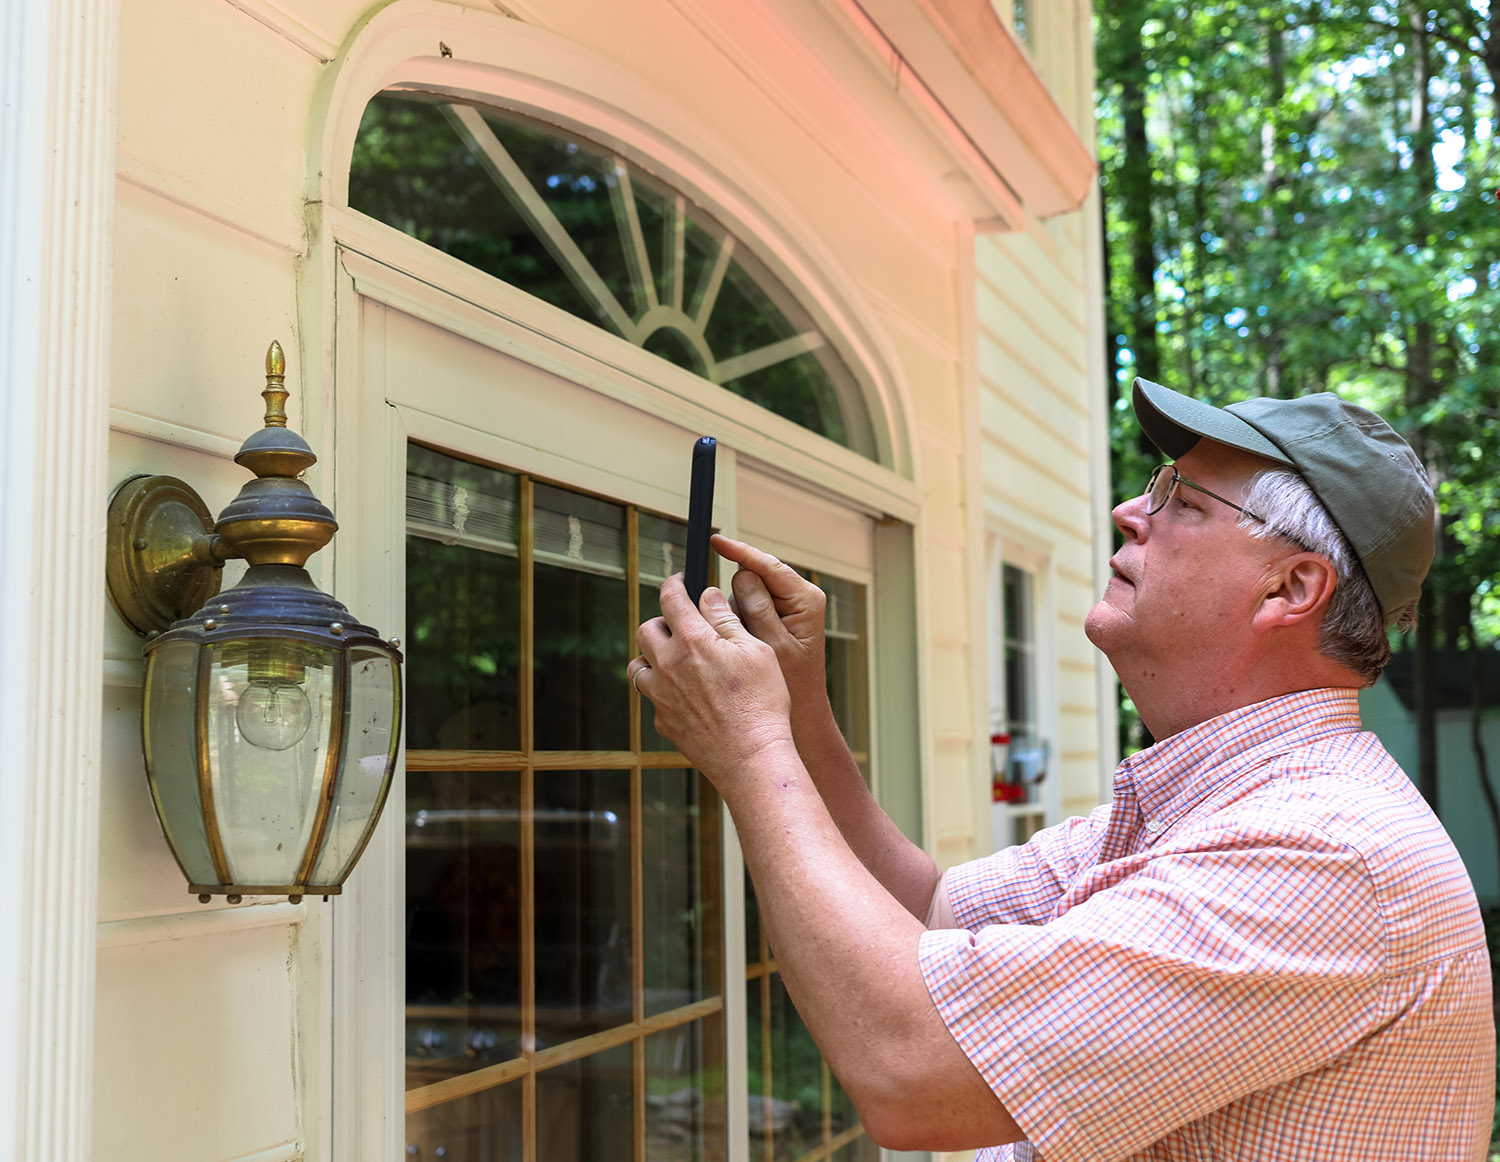 Our licensed home inspectors, Mark, inspecting the outside of a house